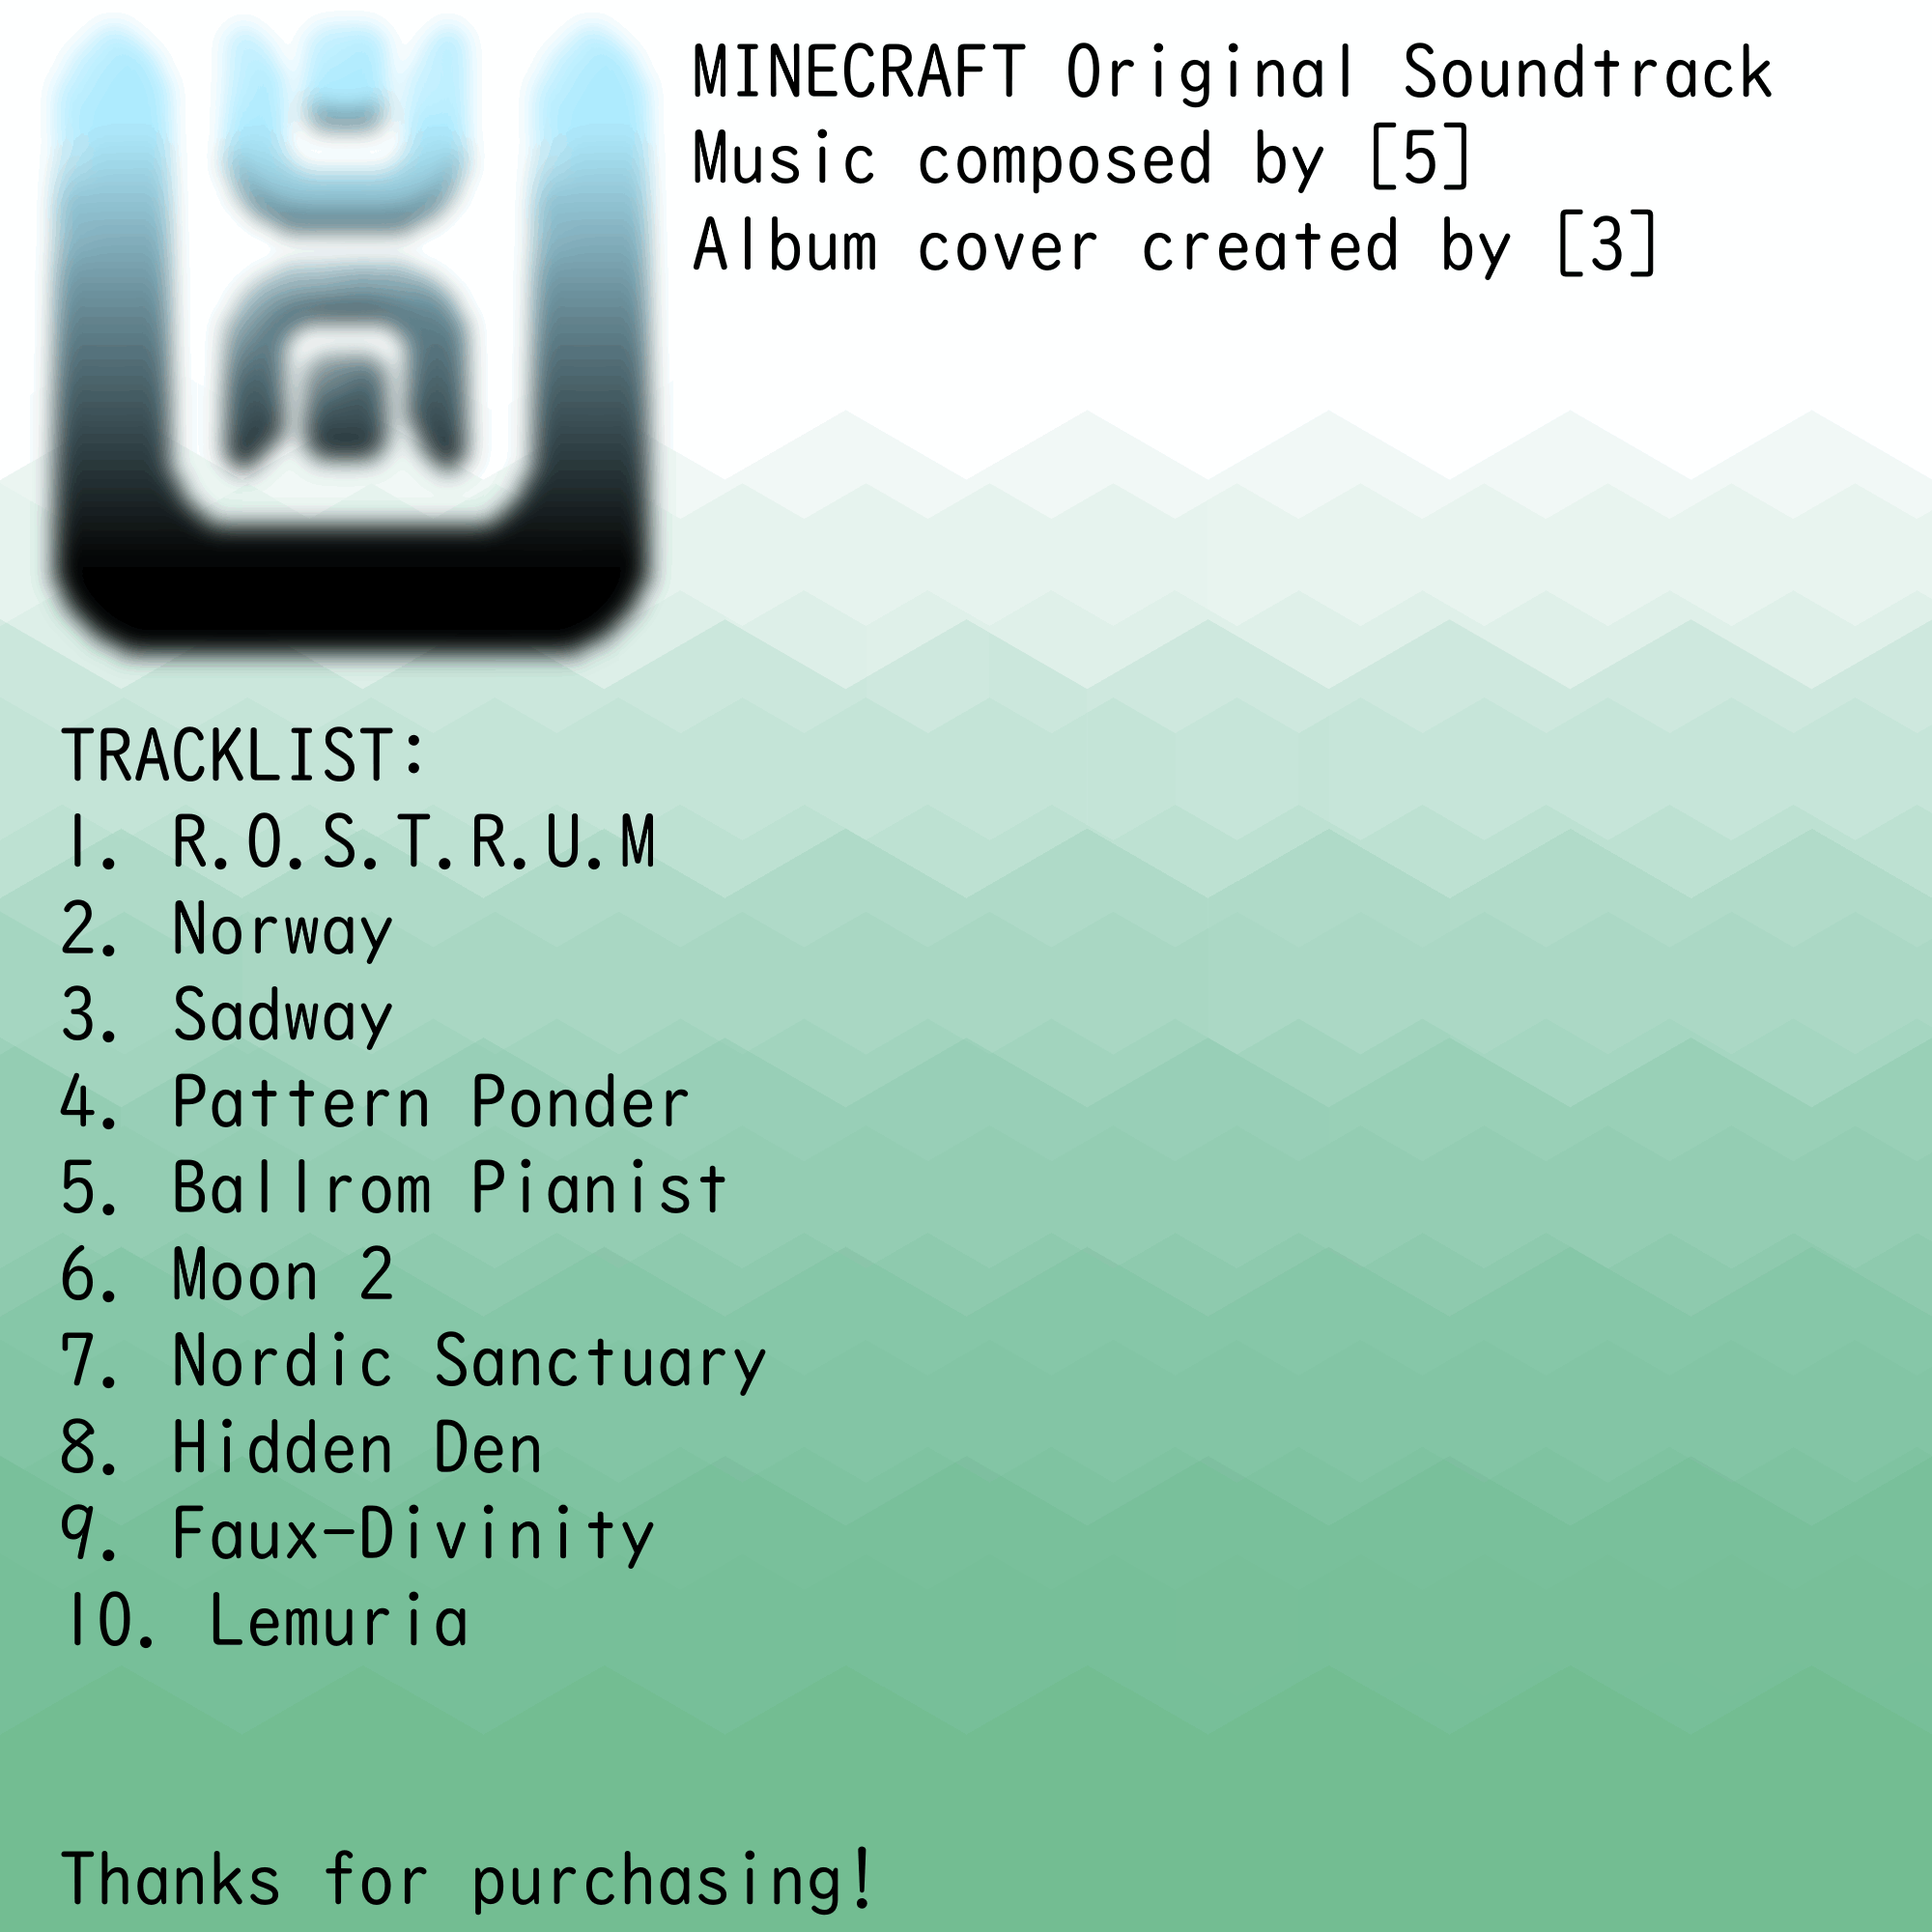 Minecraft Legacy Console Edition Unofficial Soundtrack (2017) MP3 -  Download Minecraft Legacy Console Edition Unofficial Soundtrack (2017)  Soundtracks for FREE!